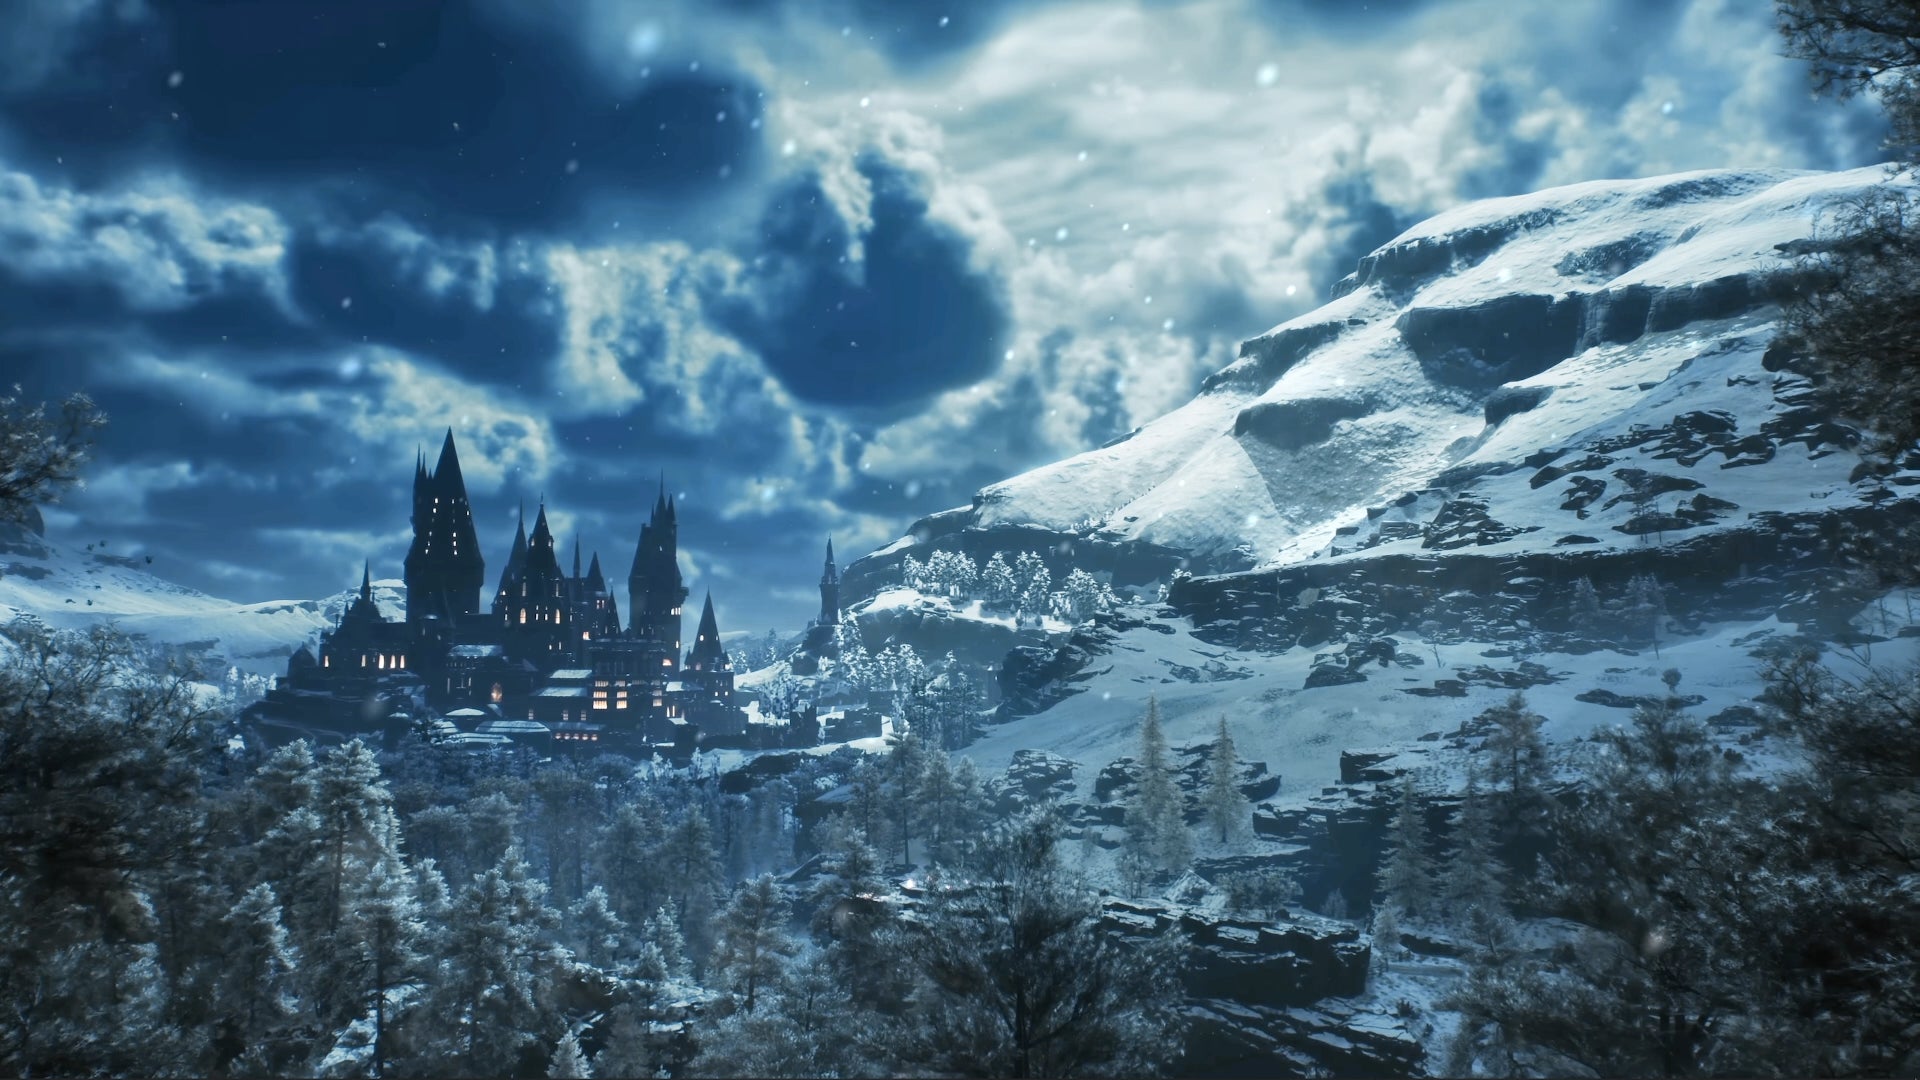 Hogwarts in the snow at night in Christmas wallpaper